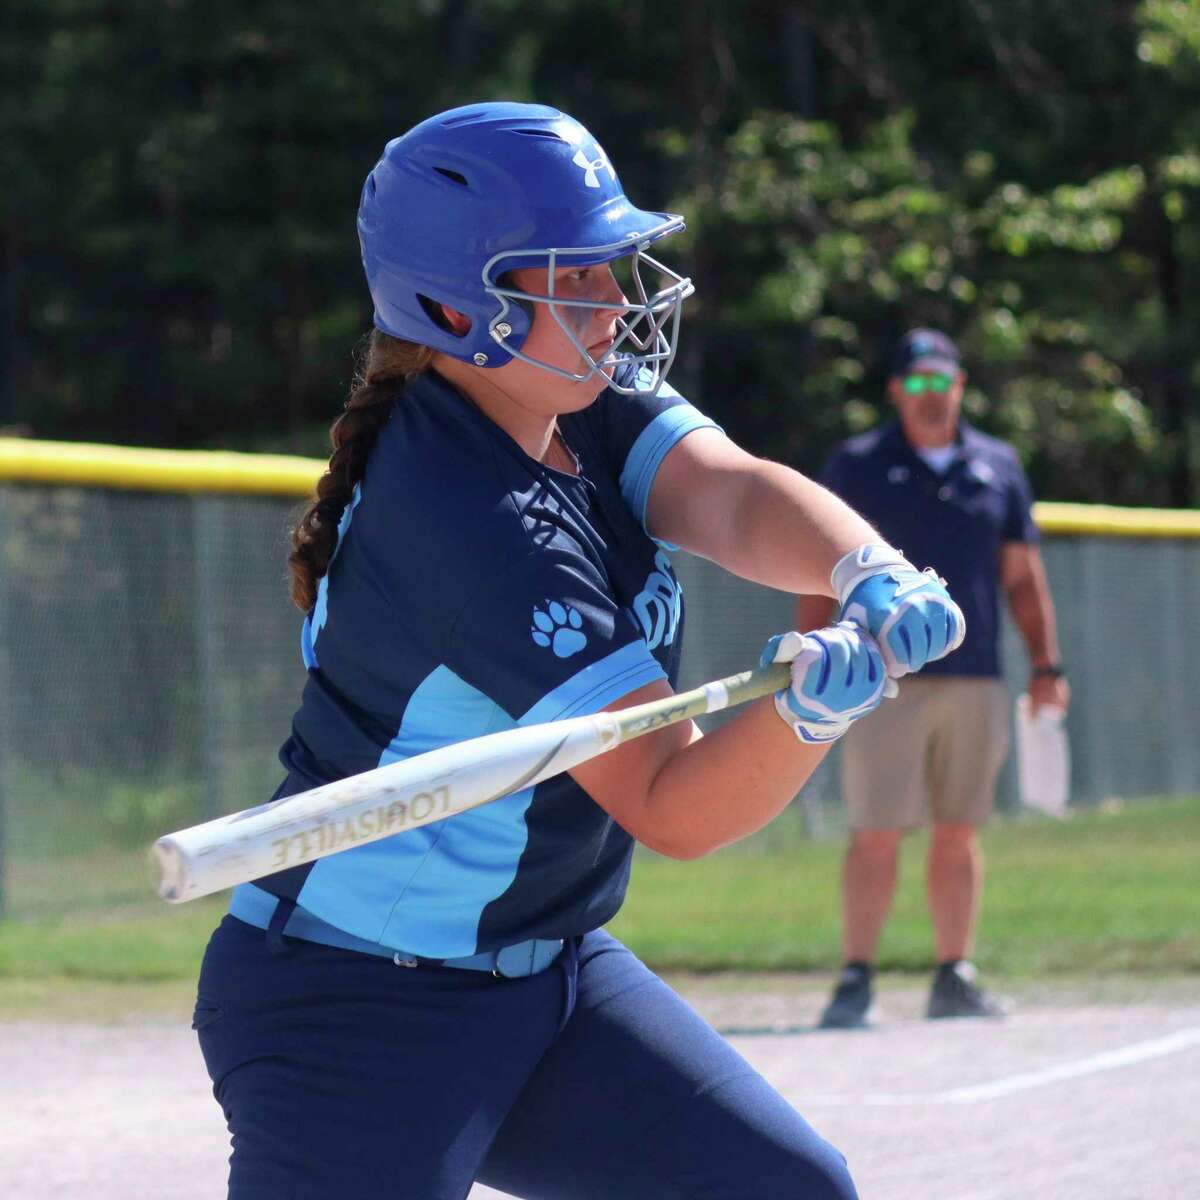 Maddy Biller swings at a pitch during districts this spring. (News Advocate file photo)